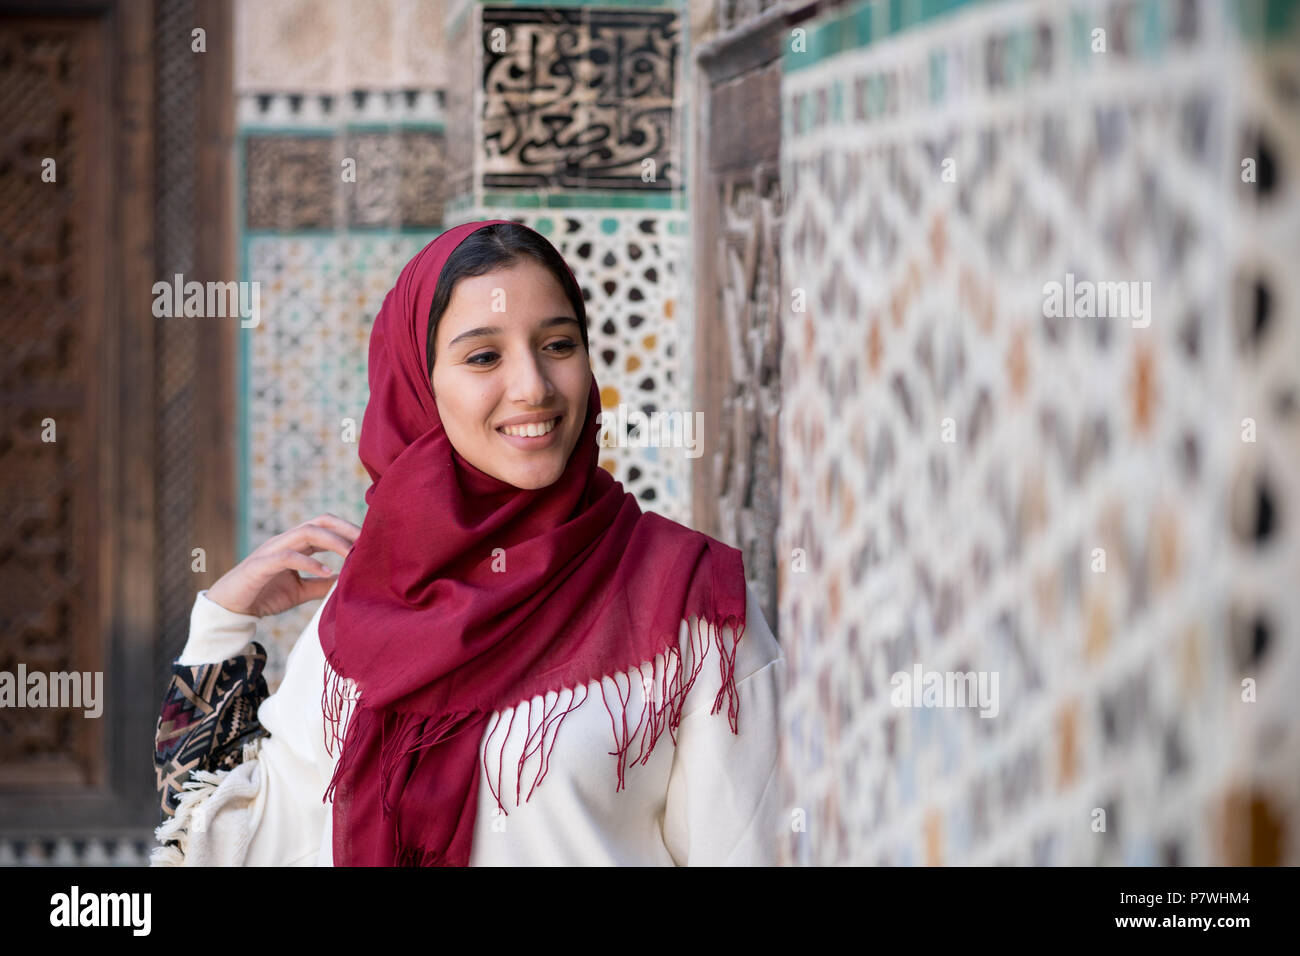 Portrait of muslim woman smiling in traditional clothing with red hijab in front of traditional arabesque decorated wall Stock Photo